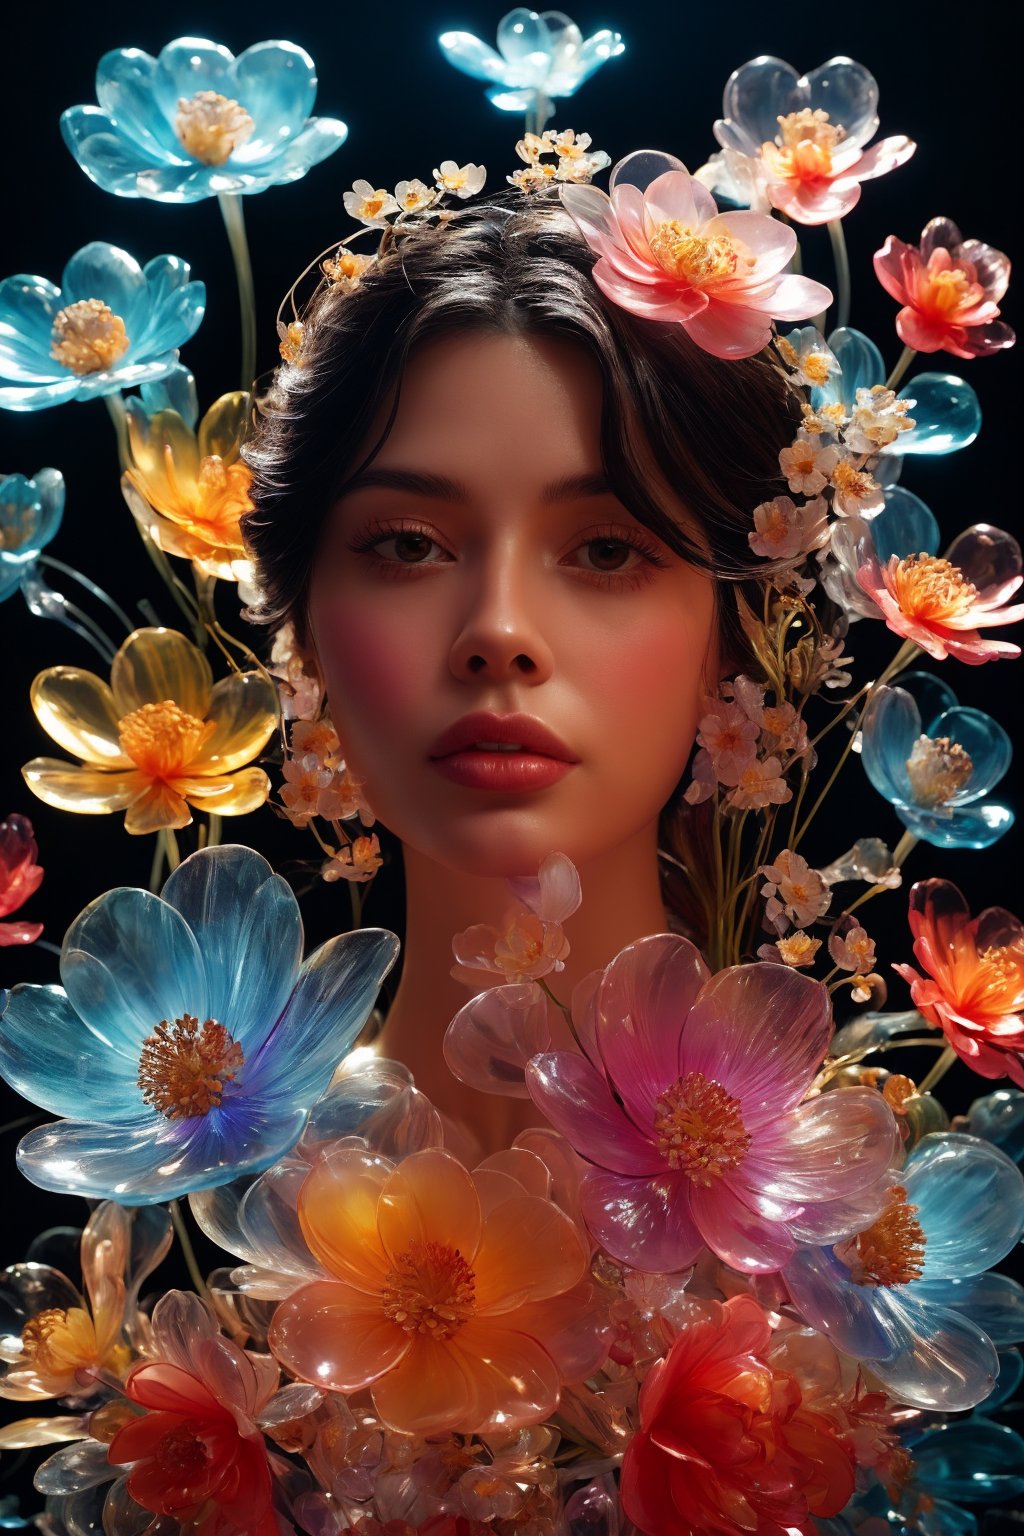 a side portrait of an attractive woman surrounded by flowers made of glass, wearing a elegnat dress made of transparent glass flowers, transparent flower, glass flower, filled with flowers, full of flowers, flower bed (close up shot 1:1) alluring pose, glass statue, attractive pose, epic pose, shot from below, perspective view, dynamic angle, dynamic pose, fashion editorial photography, master piece, hyper realistic, real skin, natural light, wall made of glass flowers, wall filled with flowers made of glass, dreamy, surreal, enchanting, back lit photography, dramatic lighting, high contrast, studio photography, portrait photography,Transparent Glass Flowers